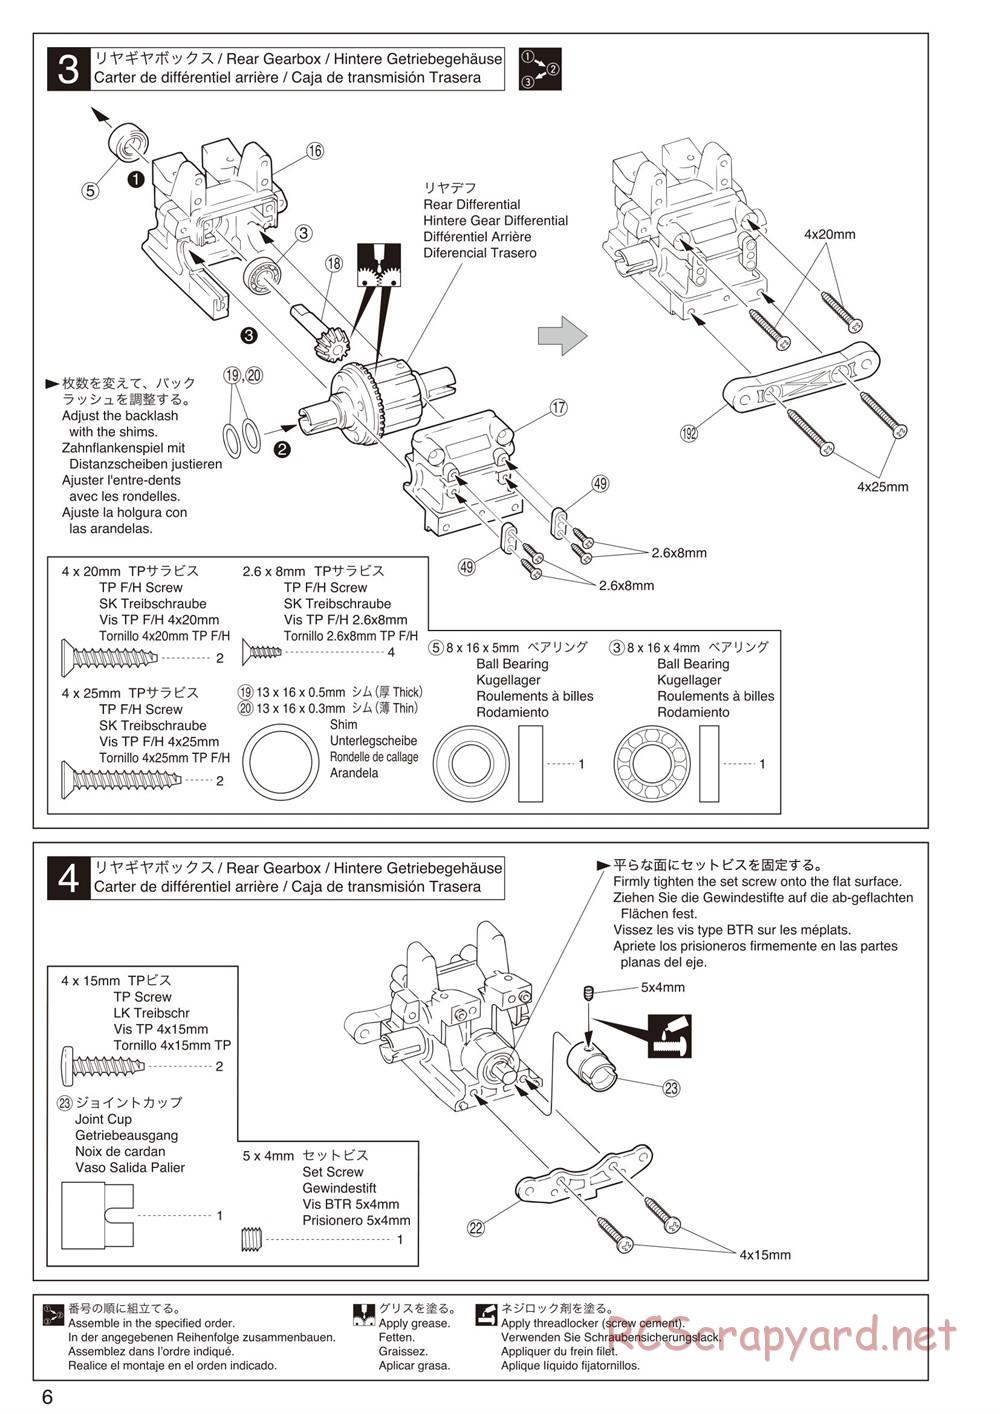 Kyosho - Inferno Neo 2.0 - Manual - Page 6